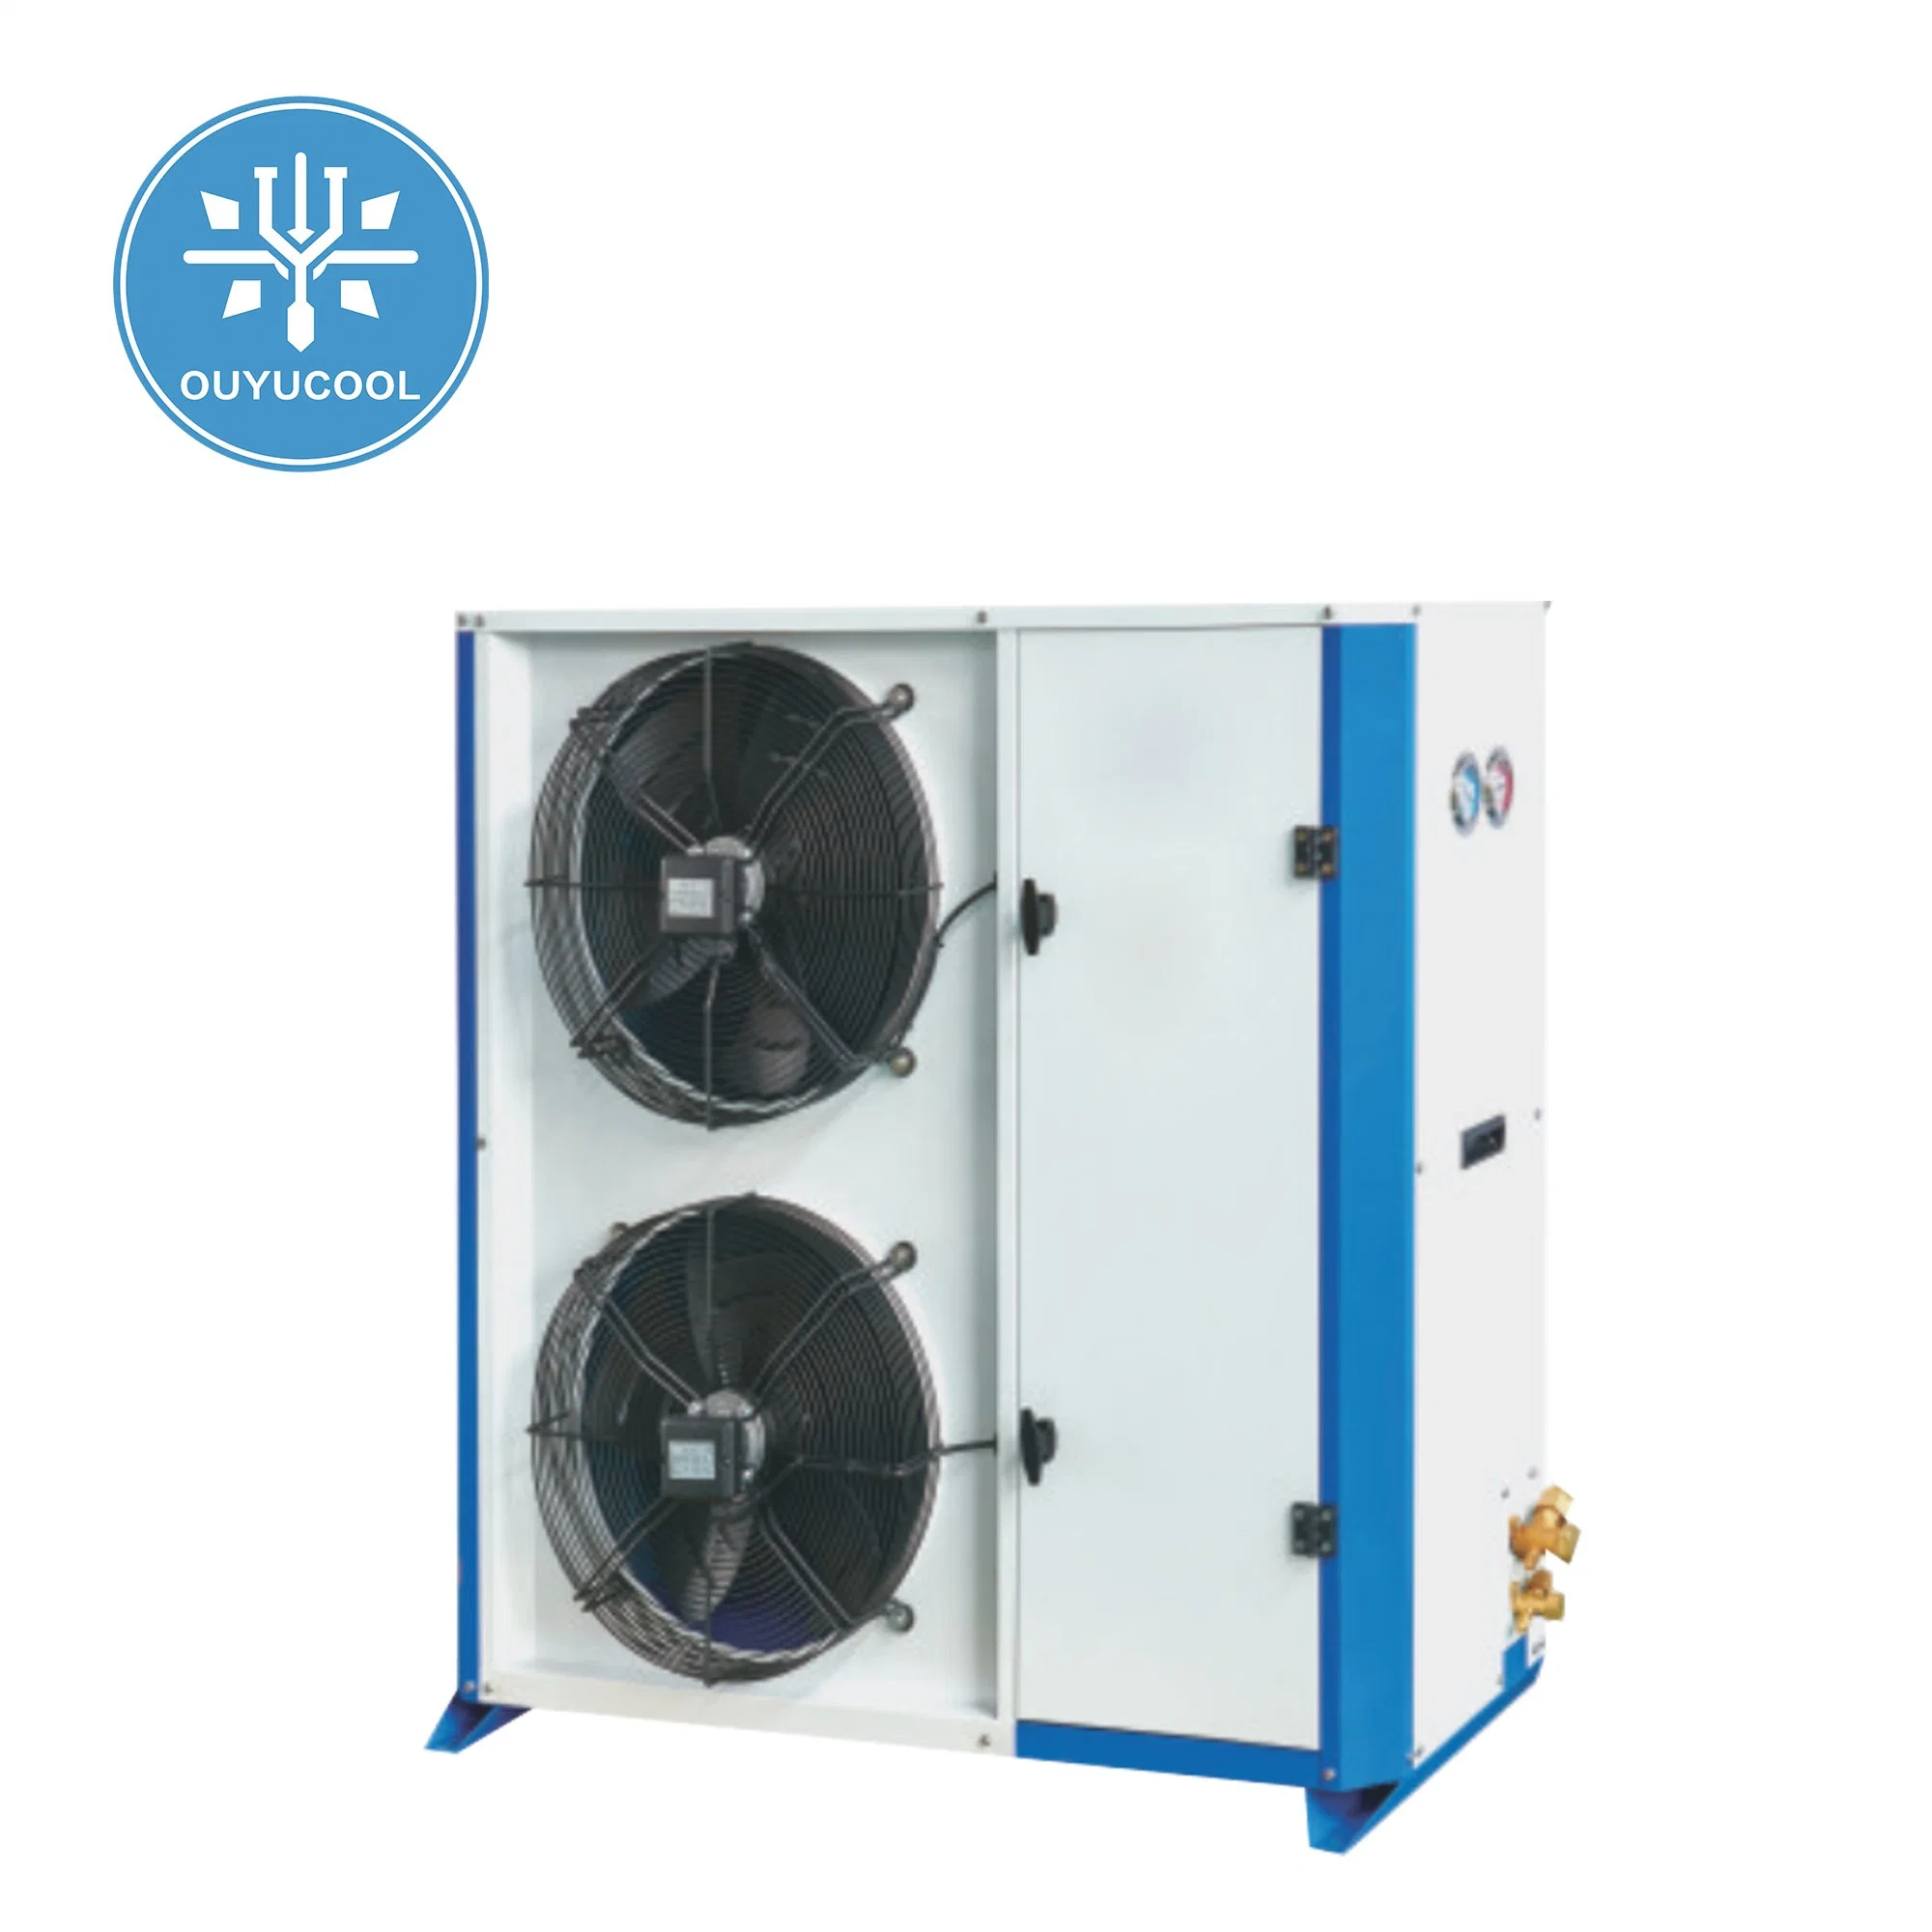 Refrigeration Equipment Hot Selling for Coldroom Ucg05mzb